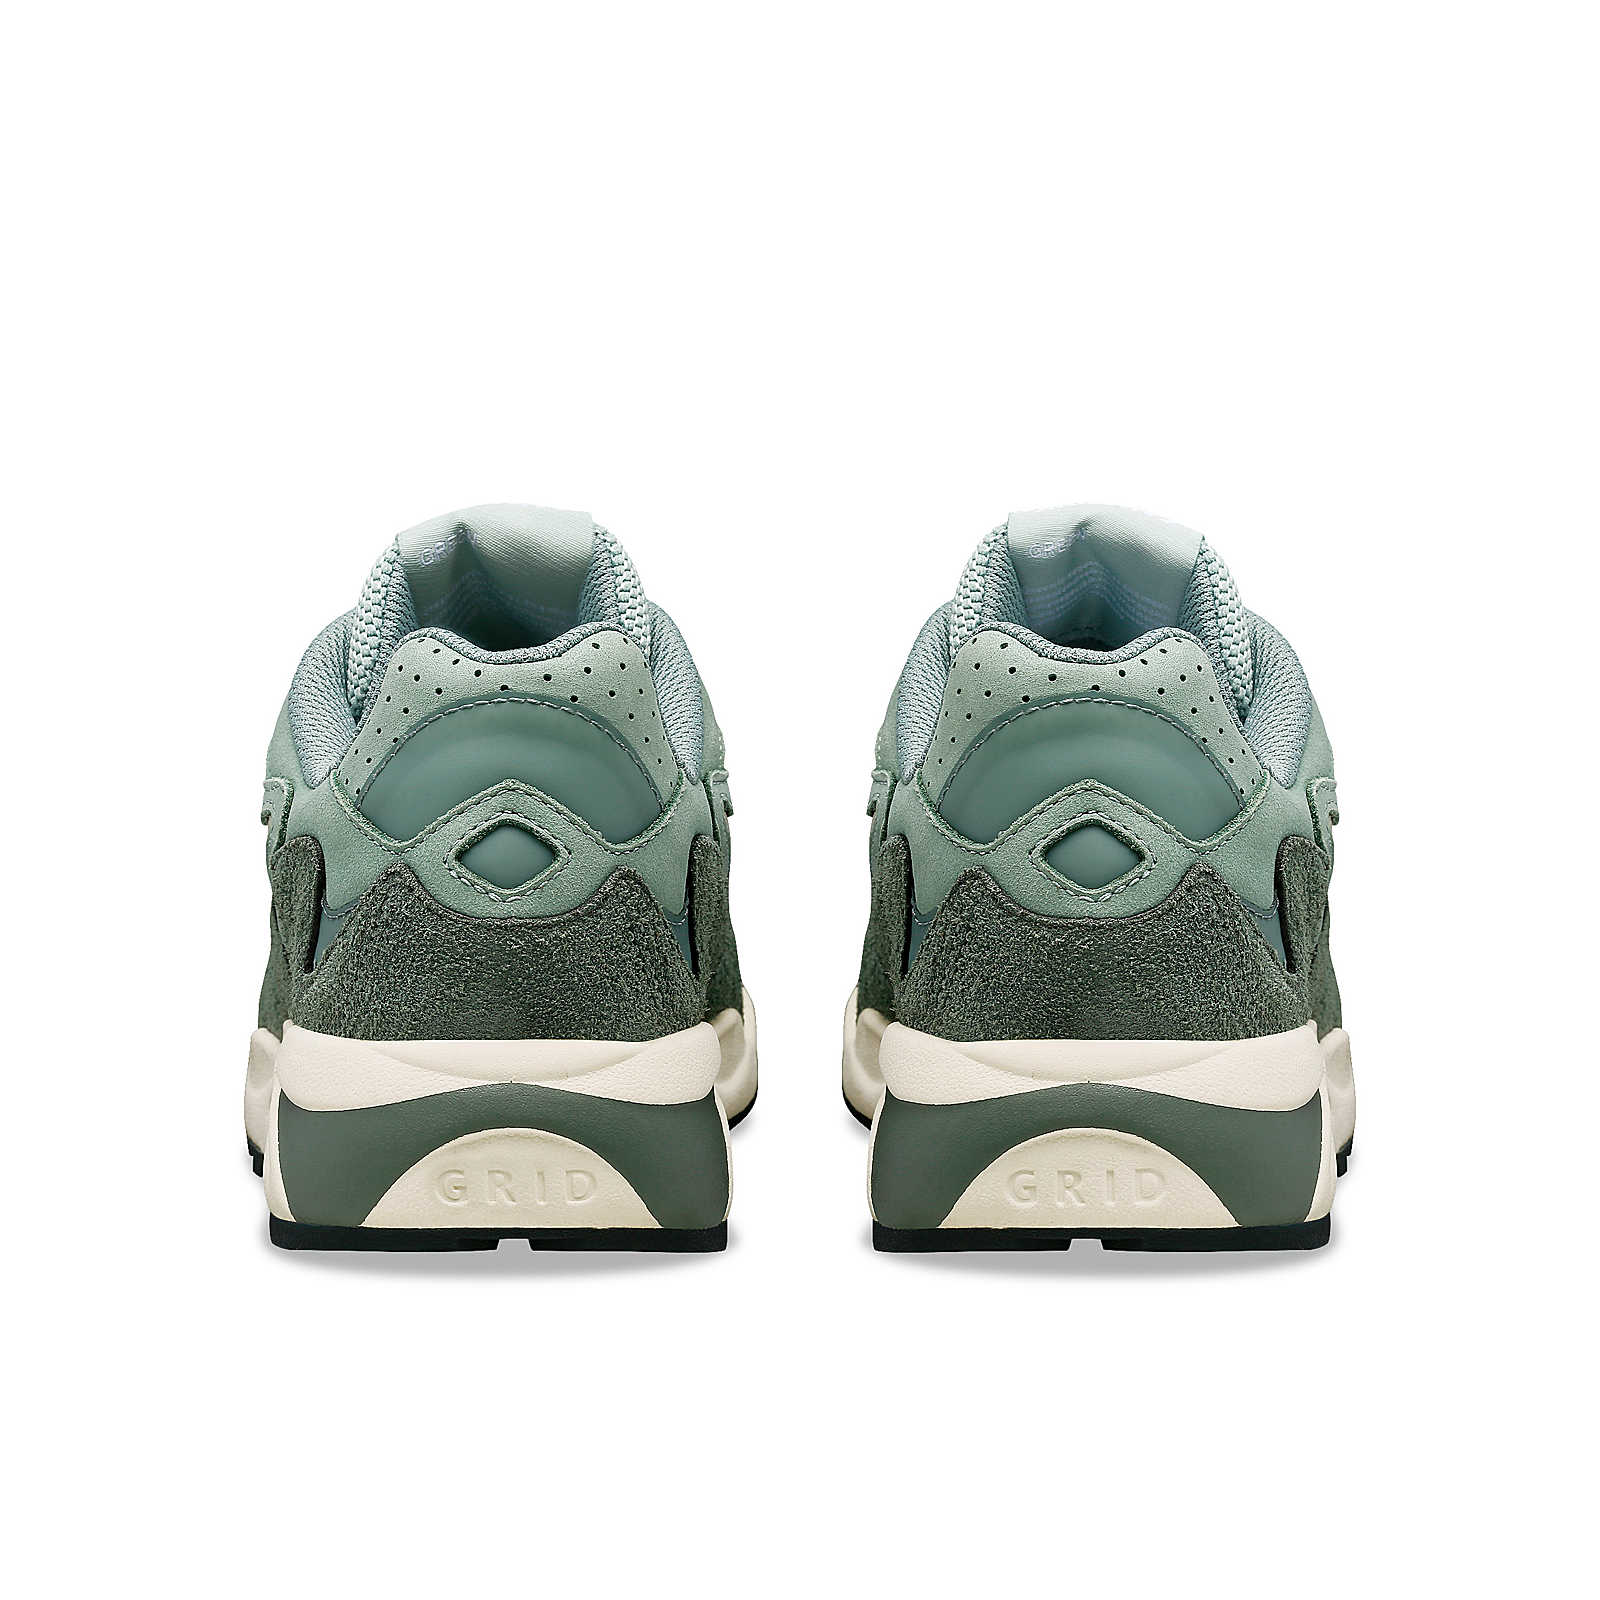 Last month END and s10681-20 Saucony dropped the White Noise Chromatic Sage 4